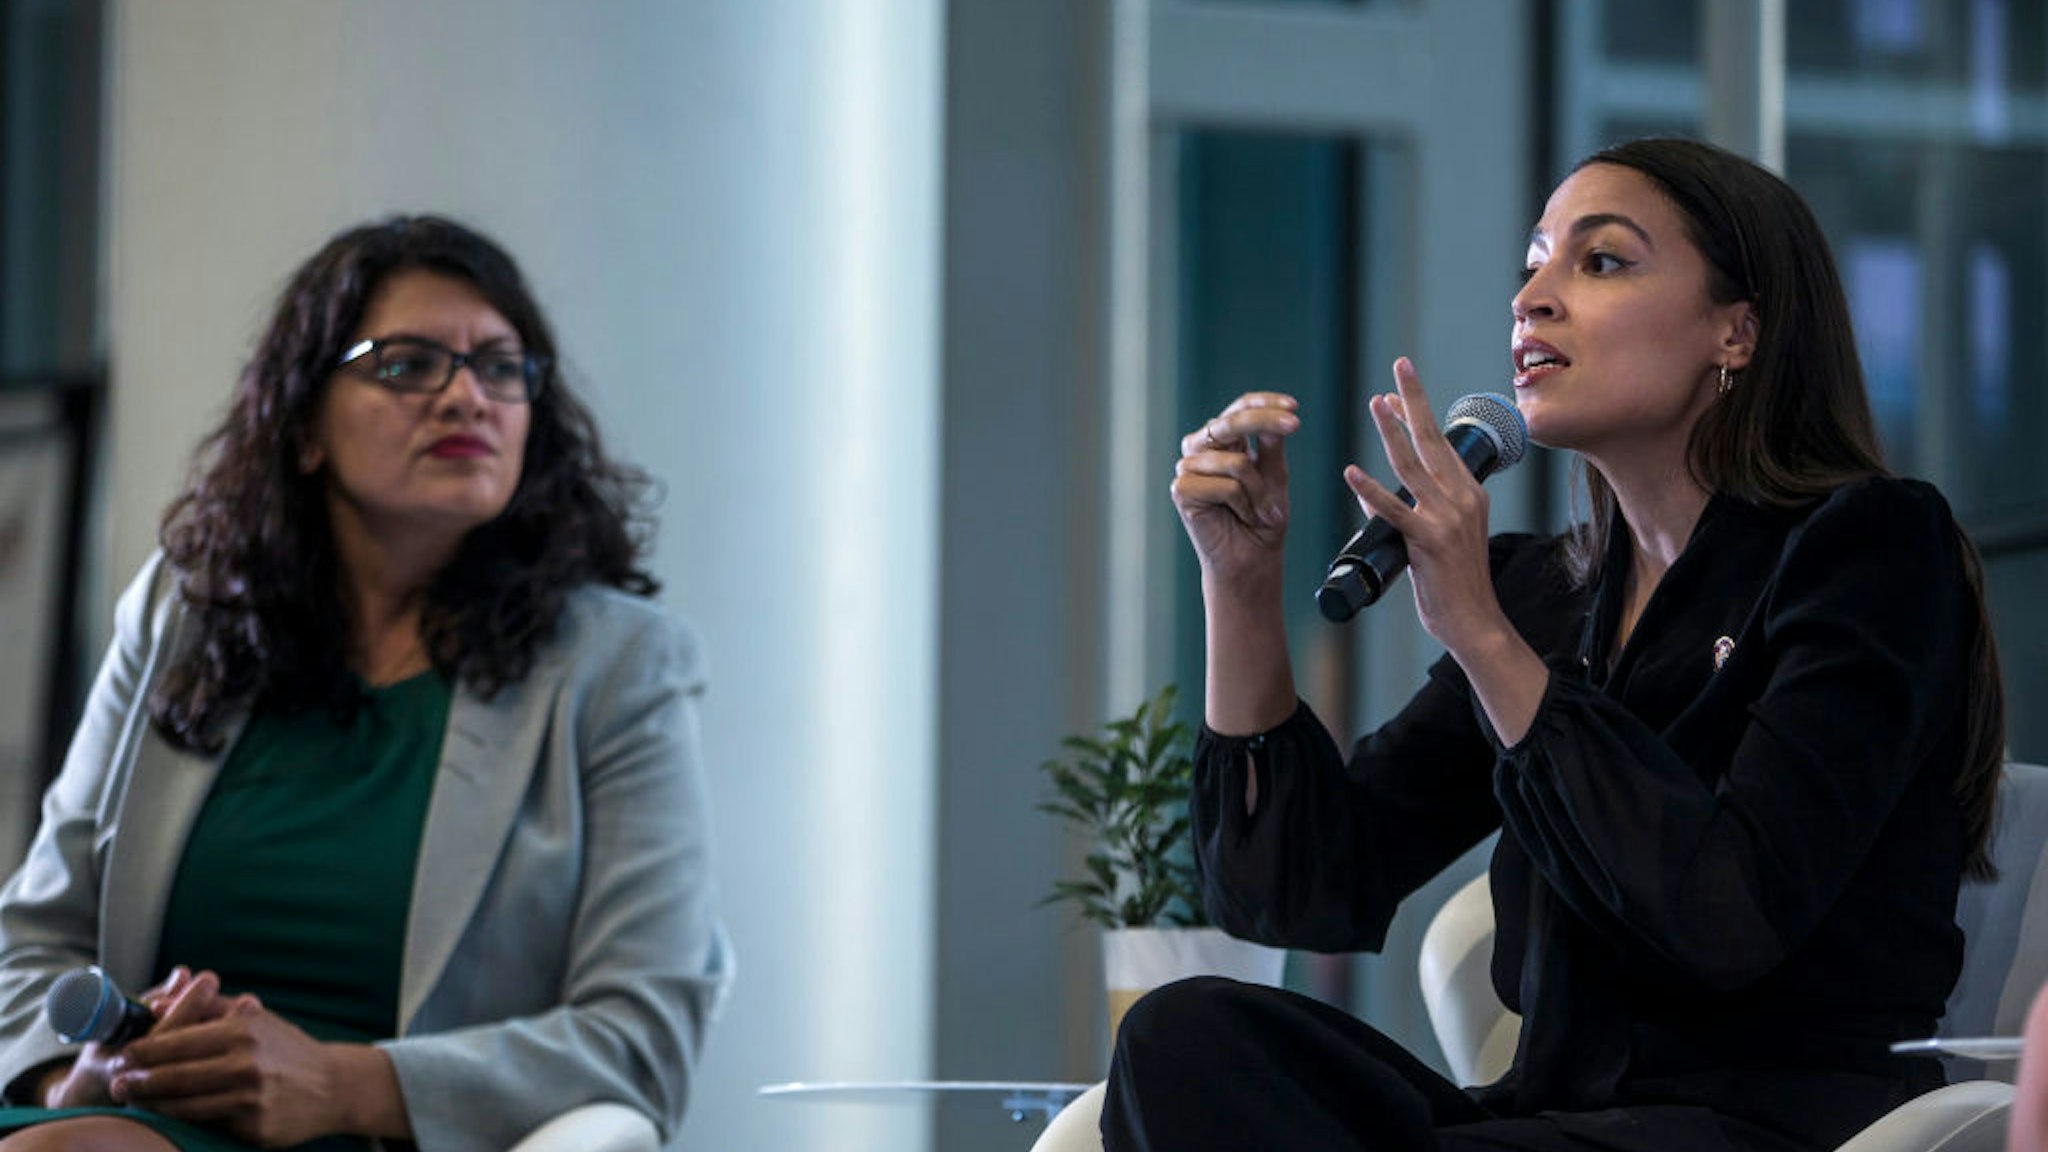 ep. Alexandria Ocasio-Cortez (D-NY) speaks during a town hall hosted by the NAACP on September 11, 2019 in Washington, DC. Also pictured is Rep. Rashida Tlaib (D-MI). The congresswomen talked about their backgrounds and how they were disruptors who “challenged conventional wisdom and assumptions” about how to get elected, among other topics.